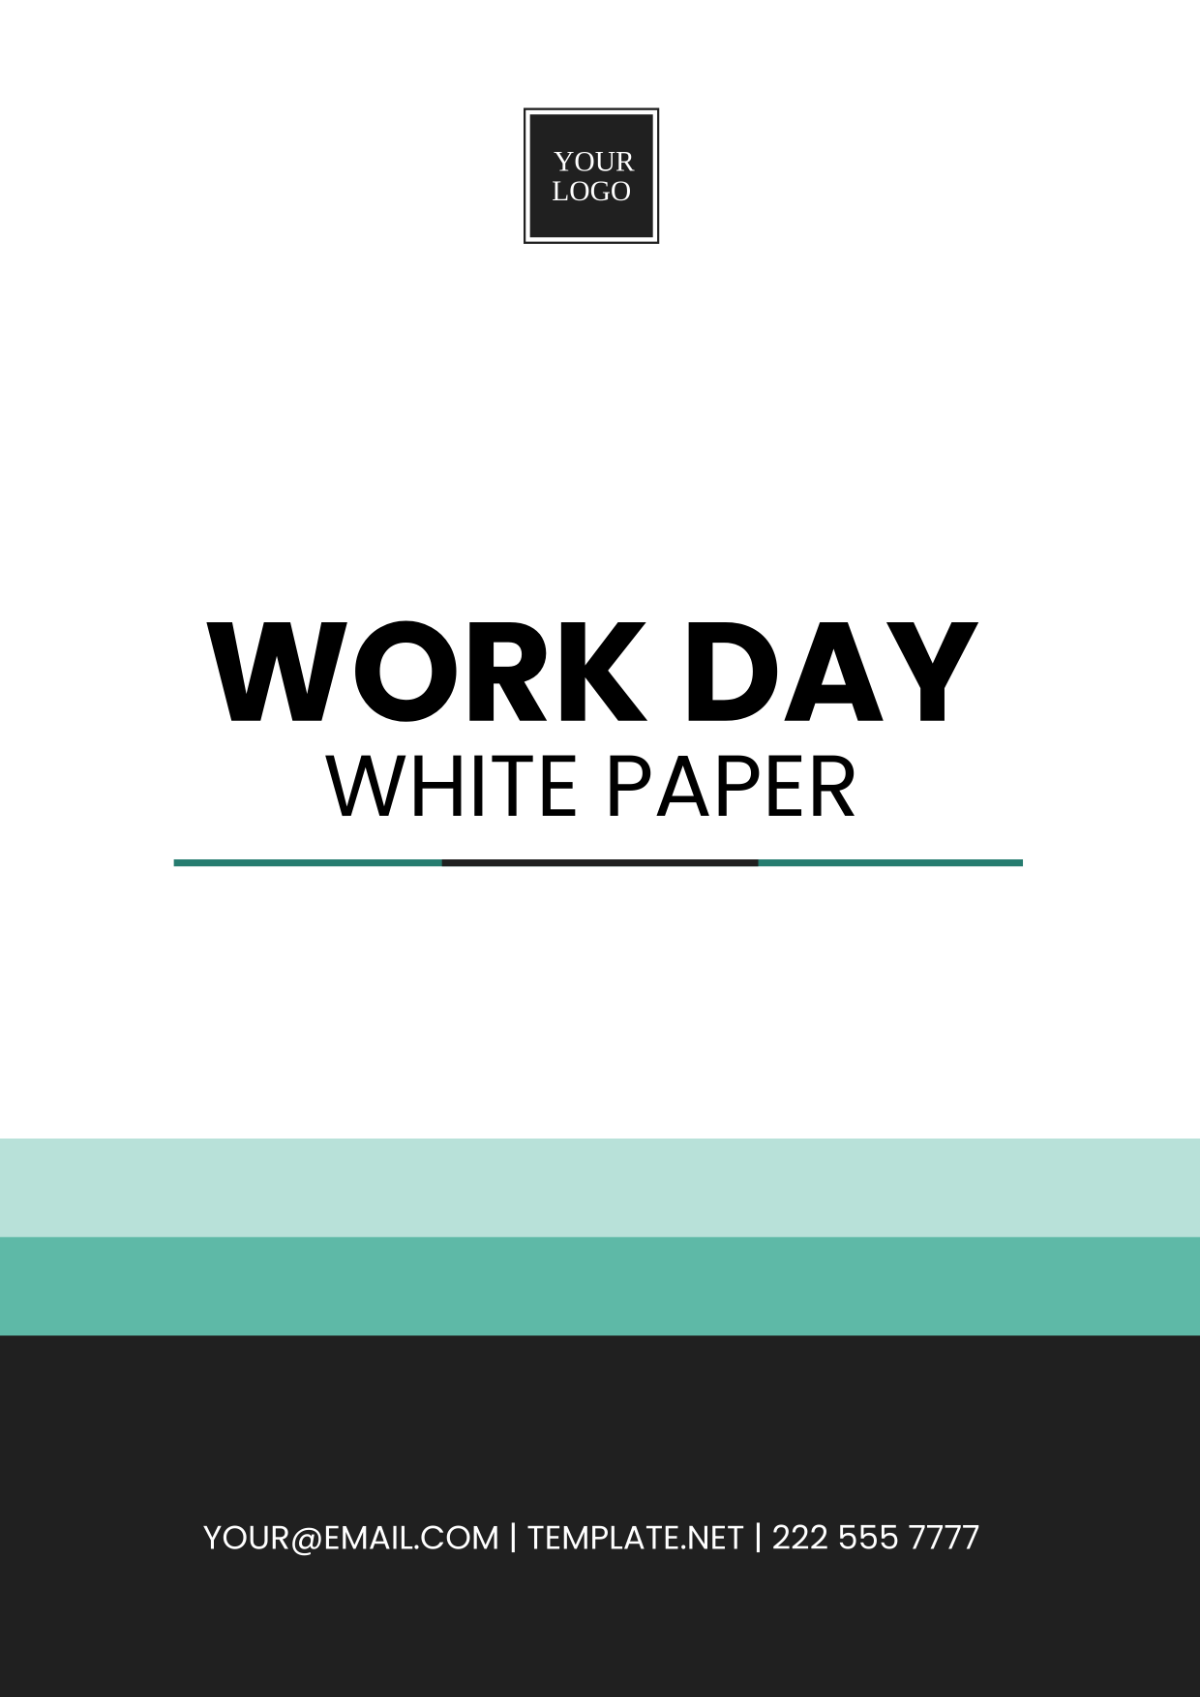 Workday White Paper Template